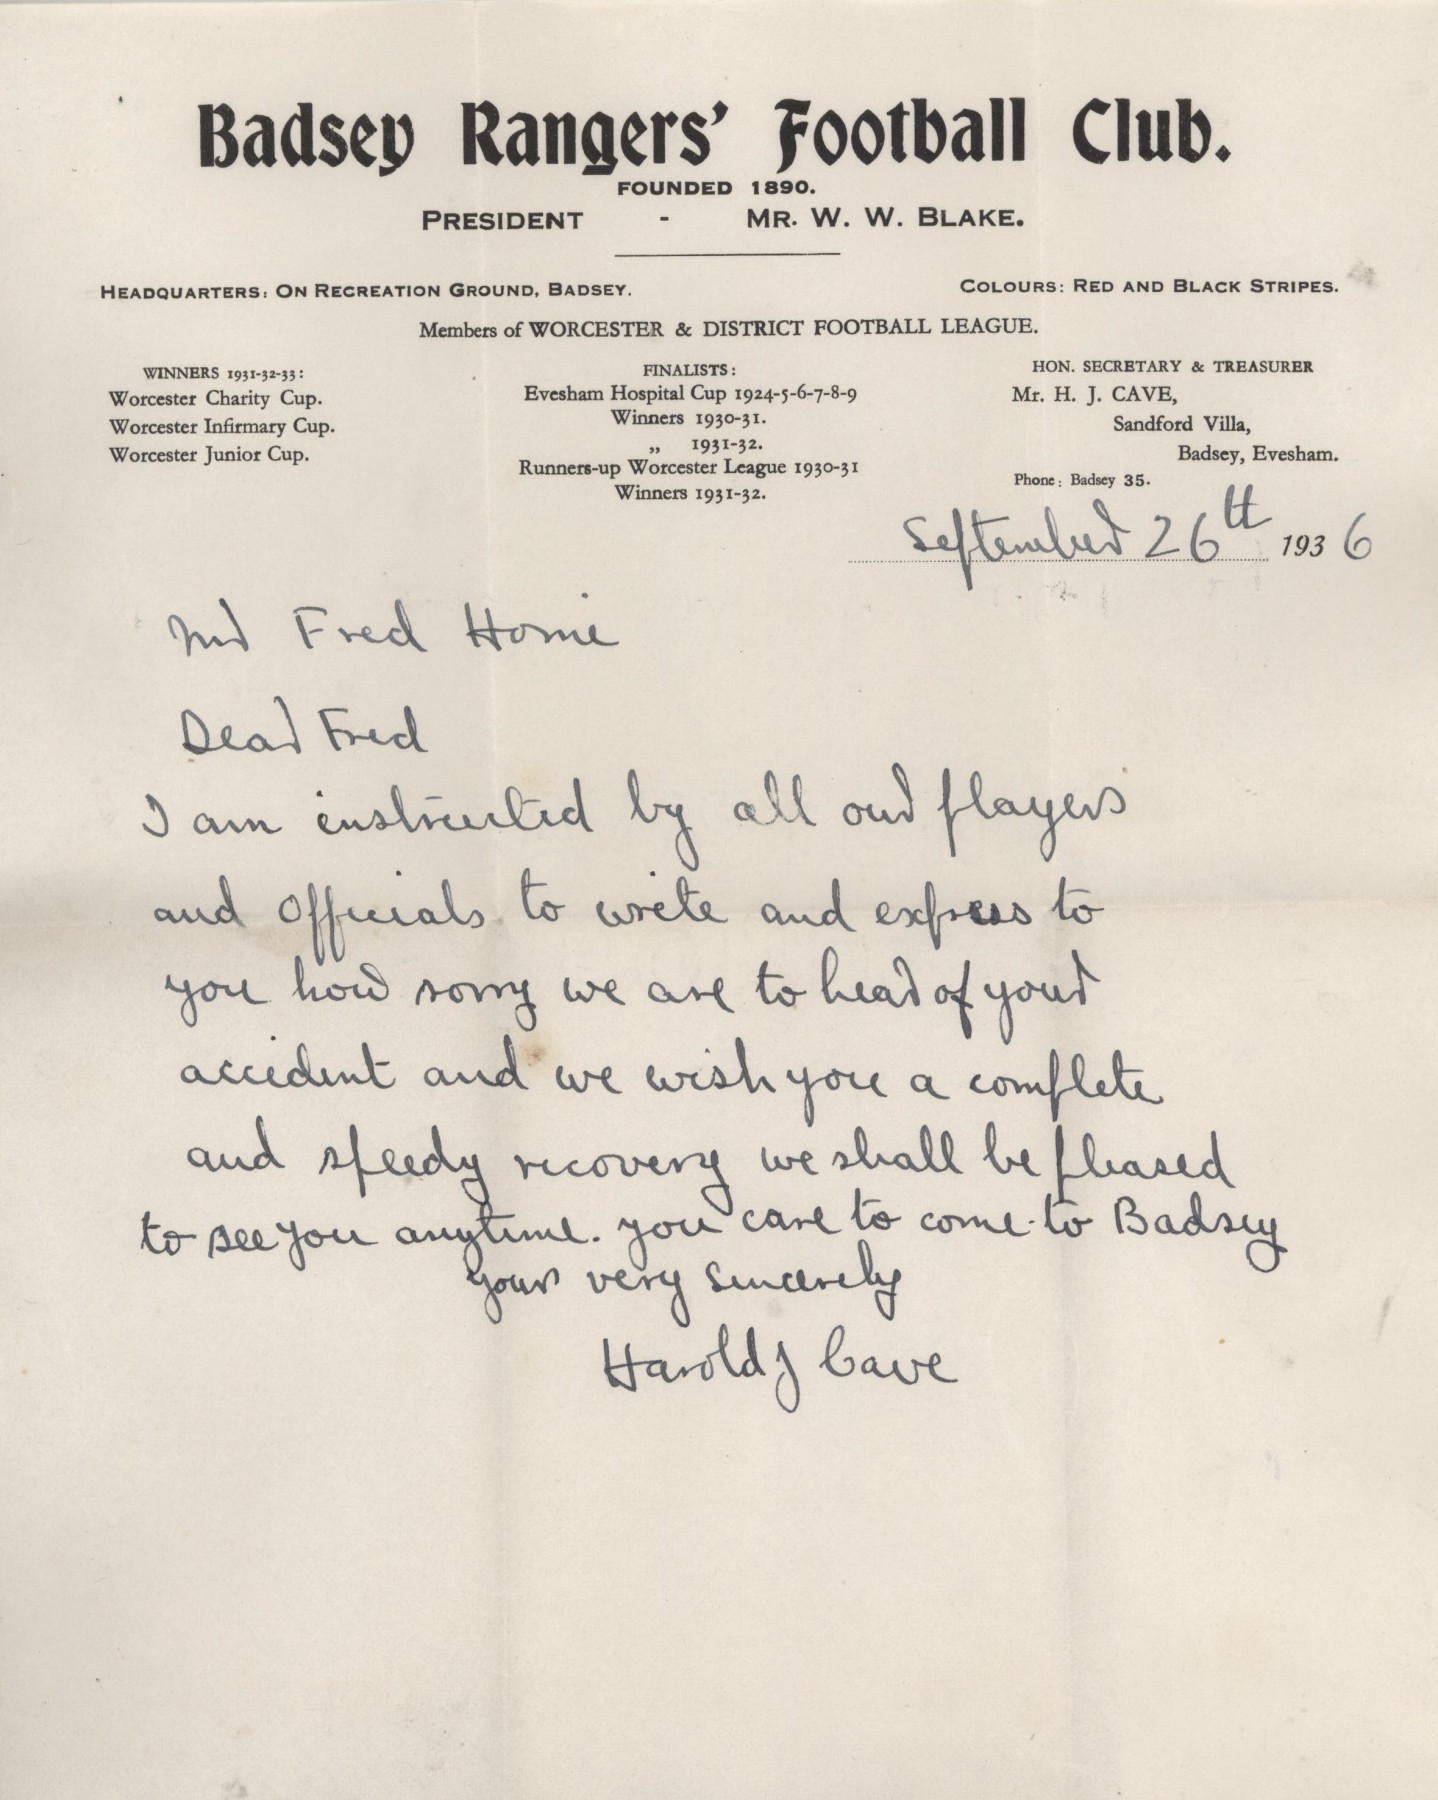 Letter from Harold Cave 1936